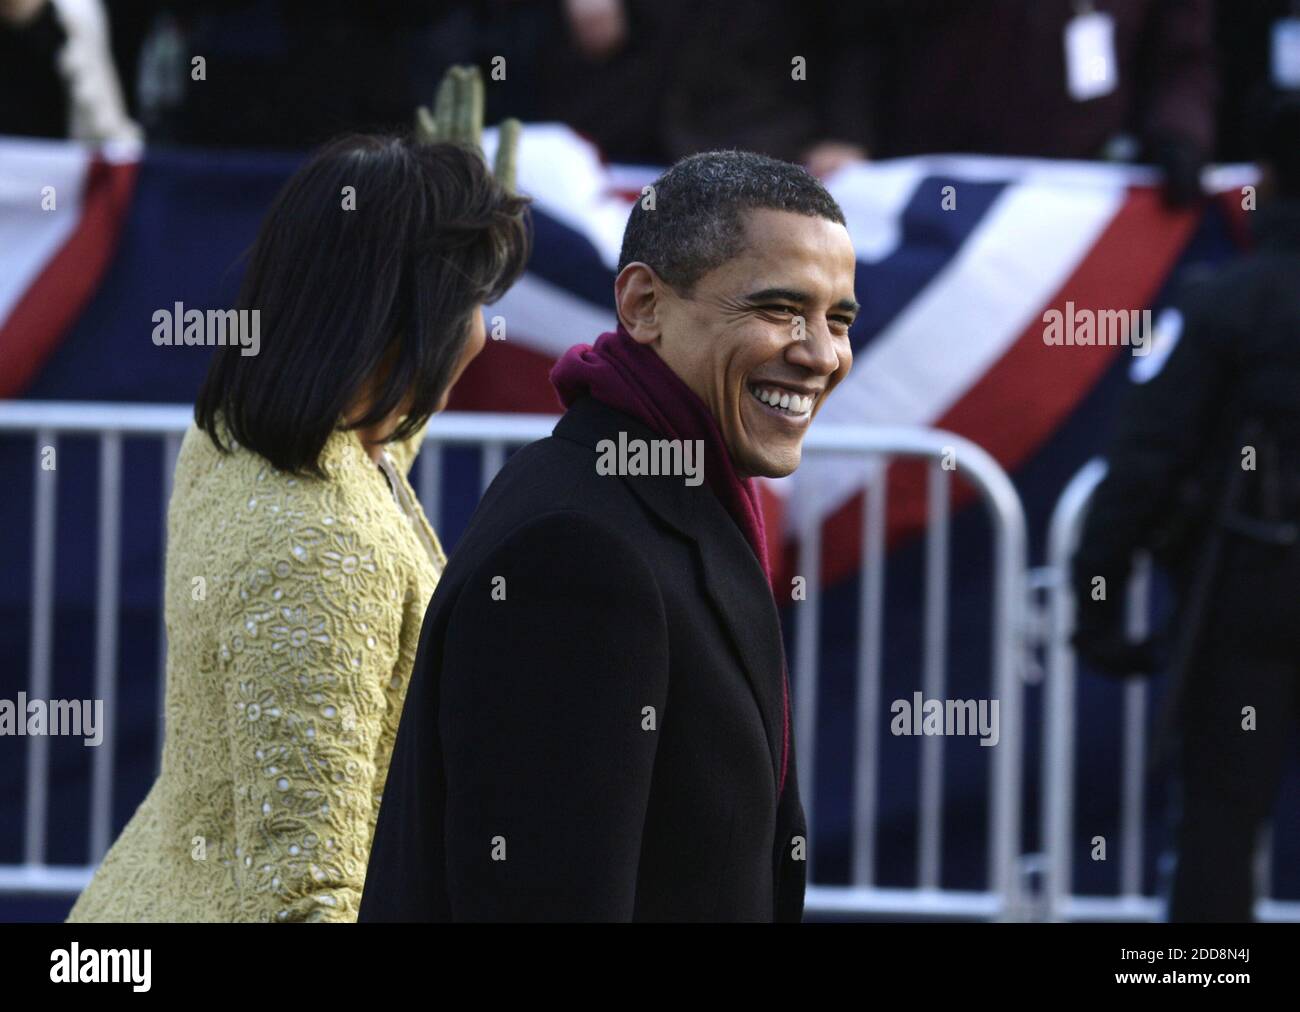 NO FILM, NO VIDEO, NO TV, NO DOCUMENTARY - President Barack Obama and wife, Michelle, walk along the parade route after he was sworn in as the 44th US President in Washington, D.C., USA, on January 20, 2009. Photo by Chuck Kennedy/MCT/ABACAPRESS.COM Stock Photo